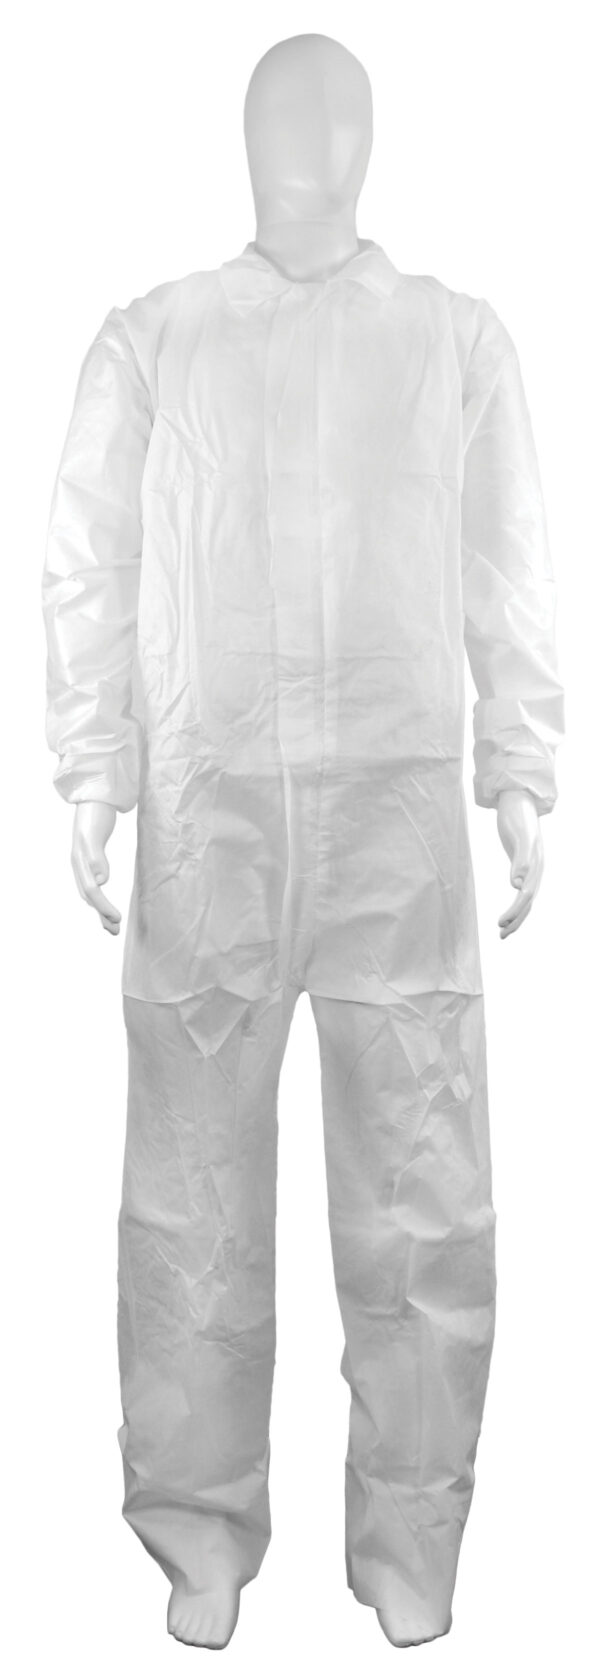 HPK Industries - Cleanroom Coverall